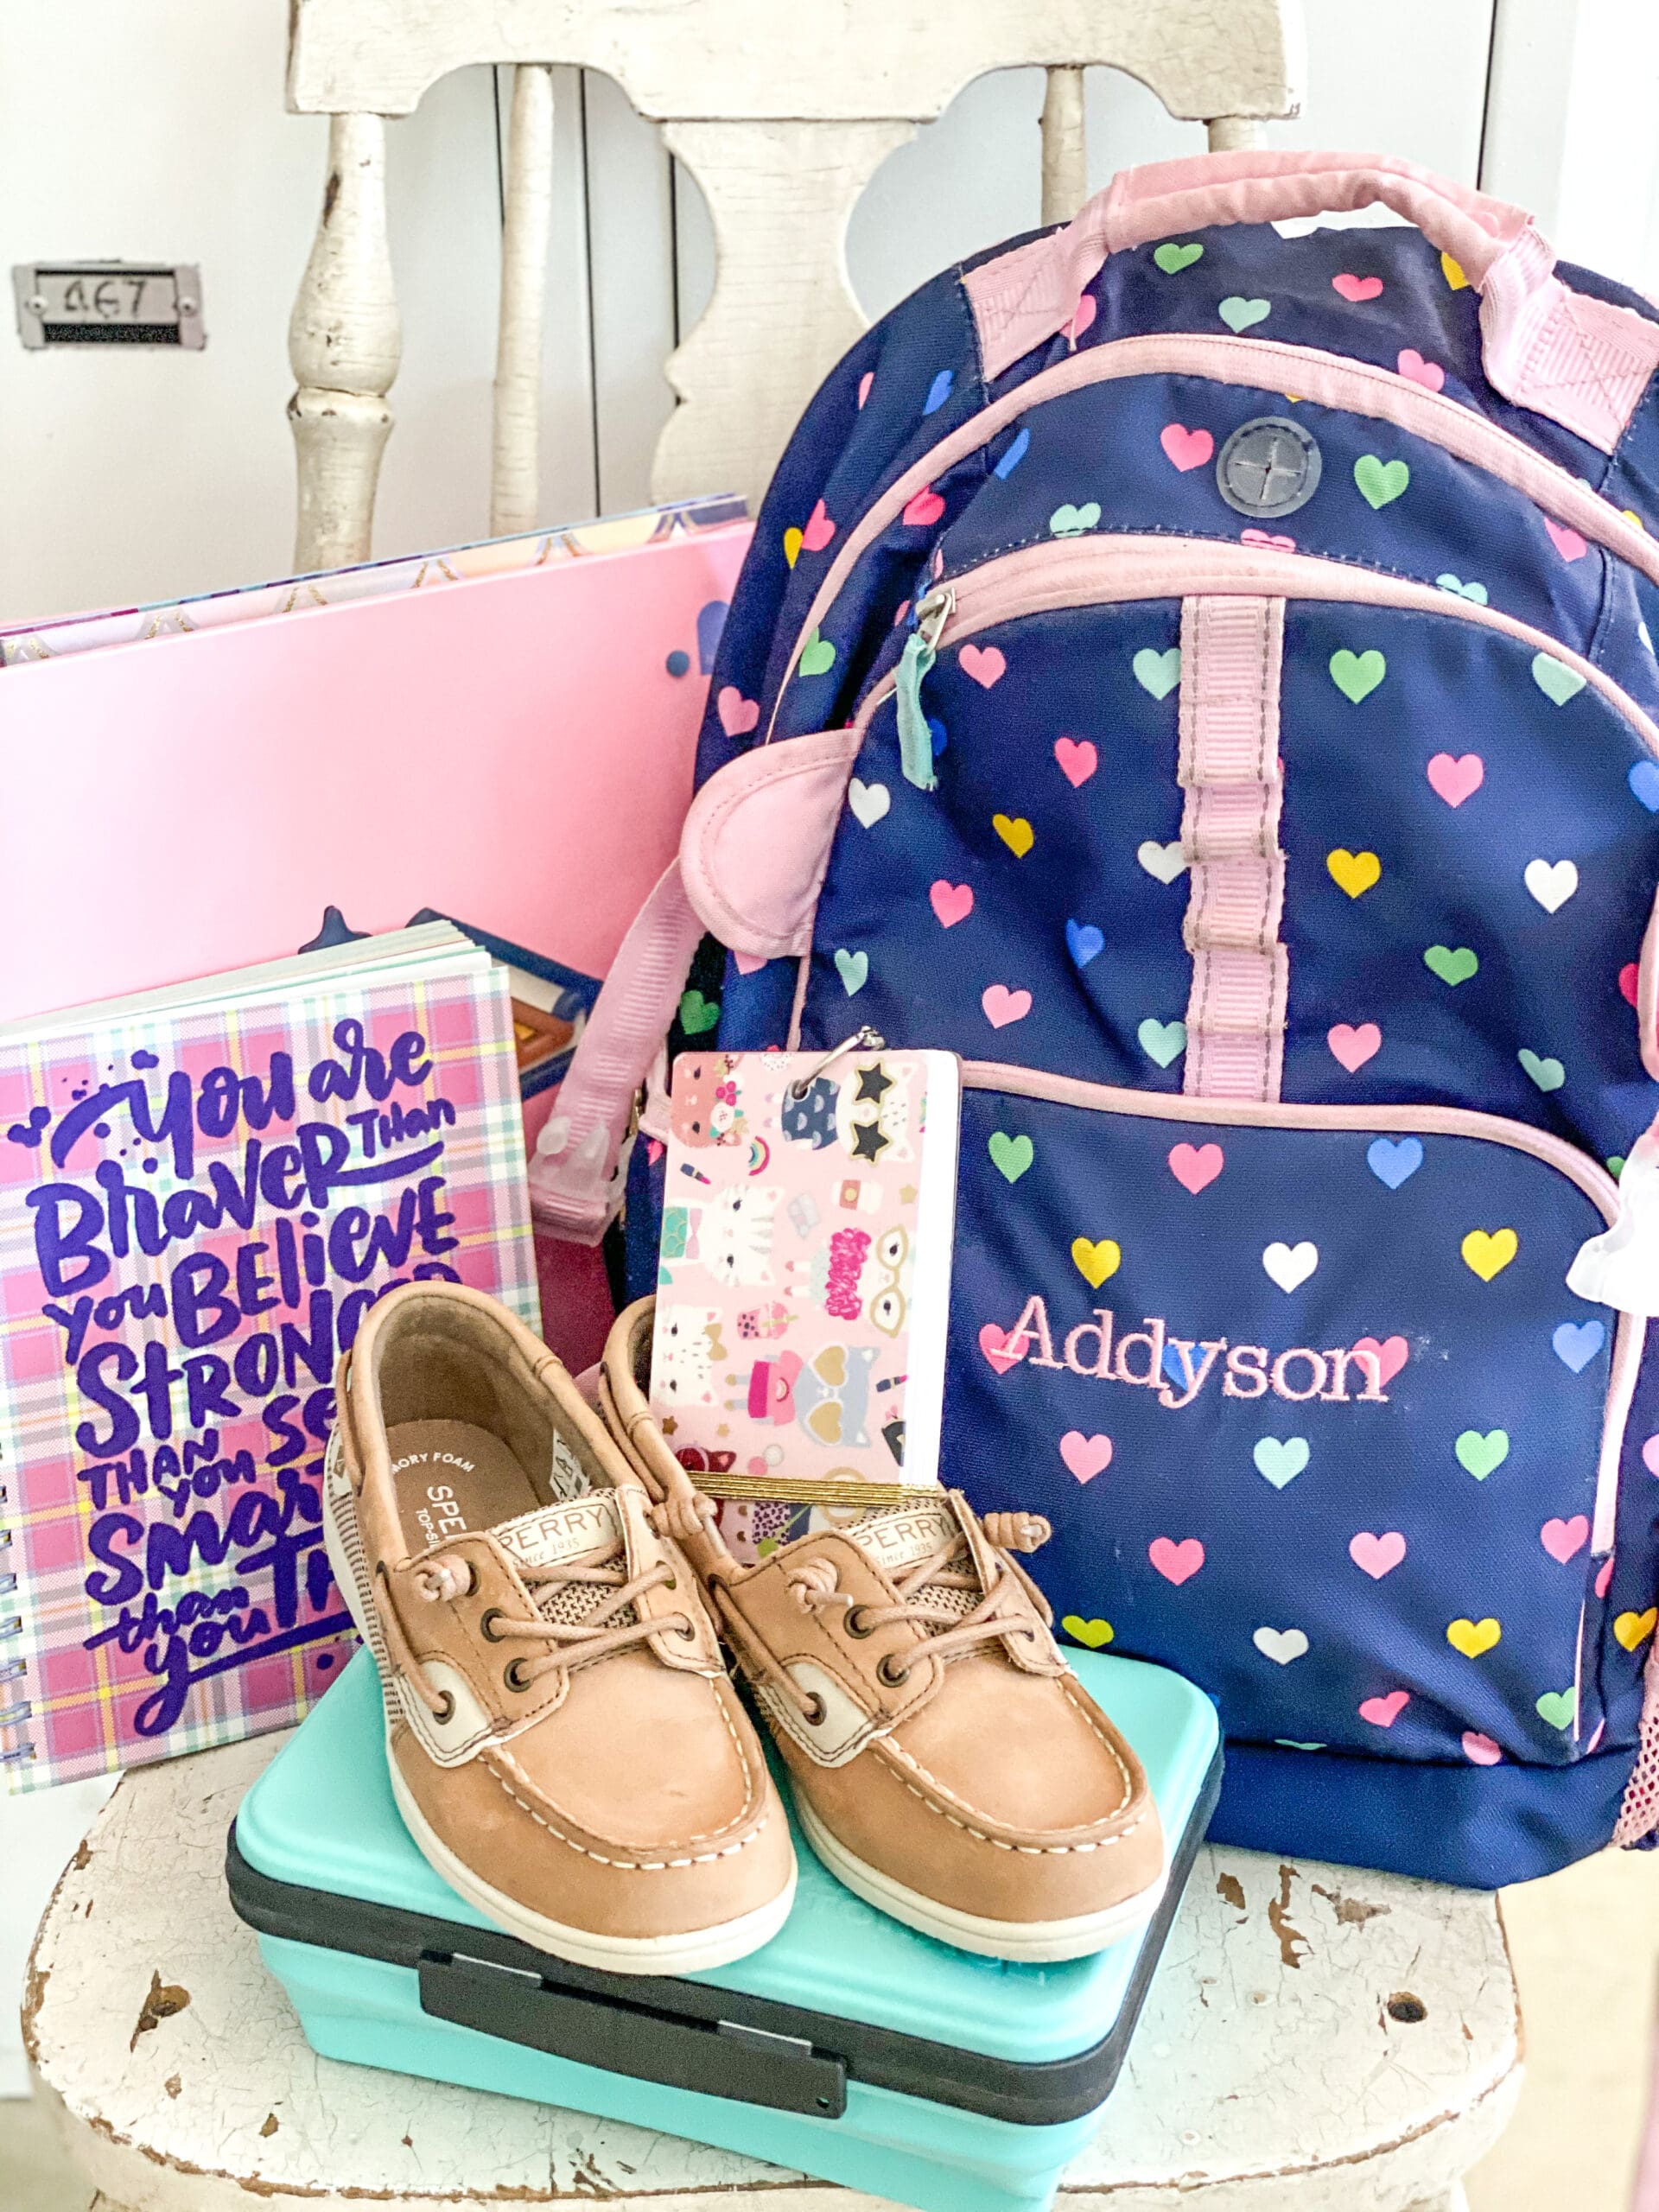 Addy's monogrammed backpack with notebook, shoes & pencil case